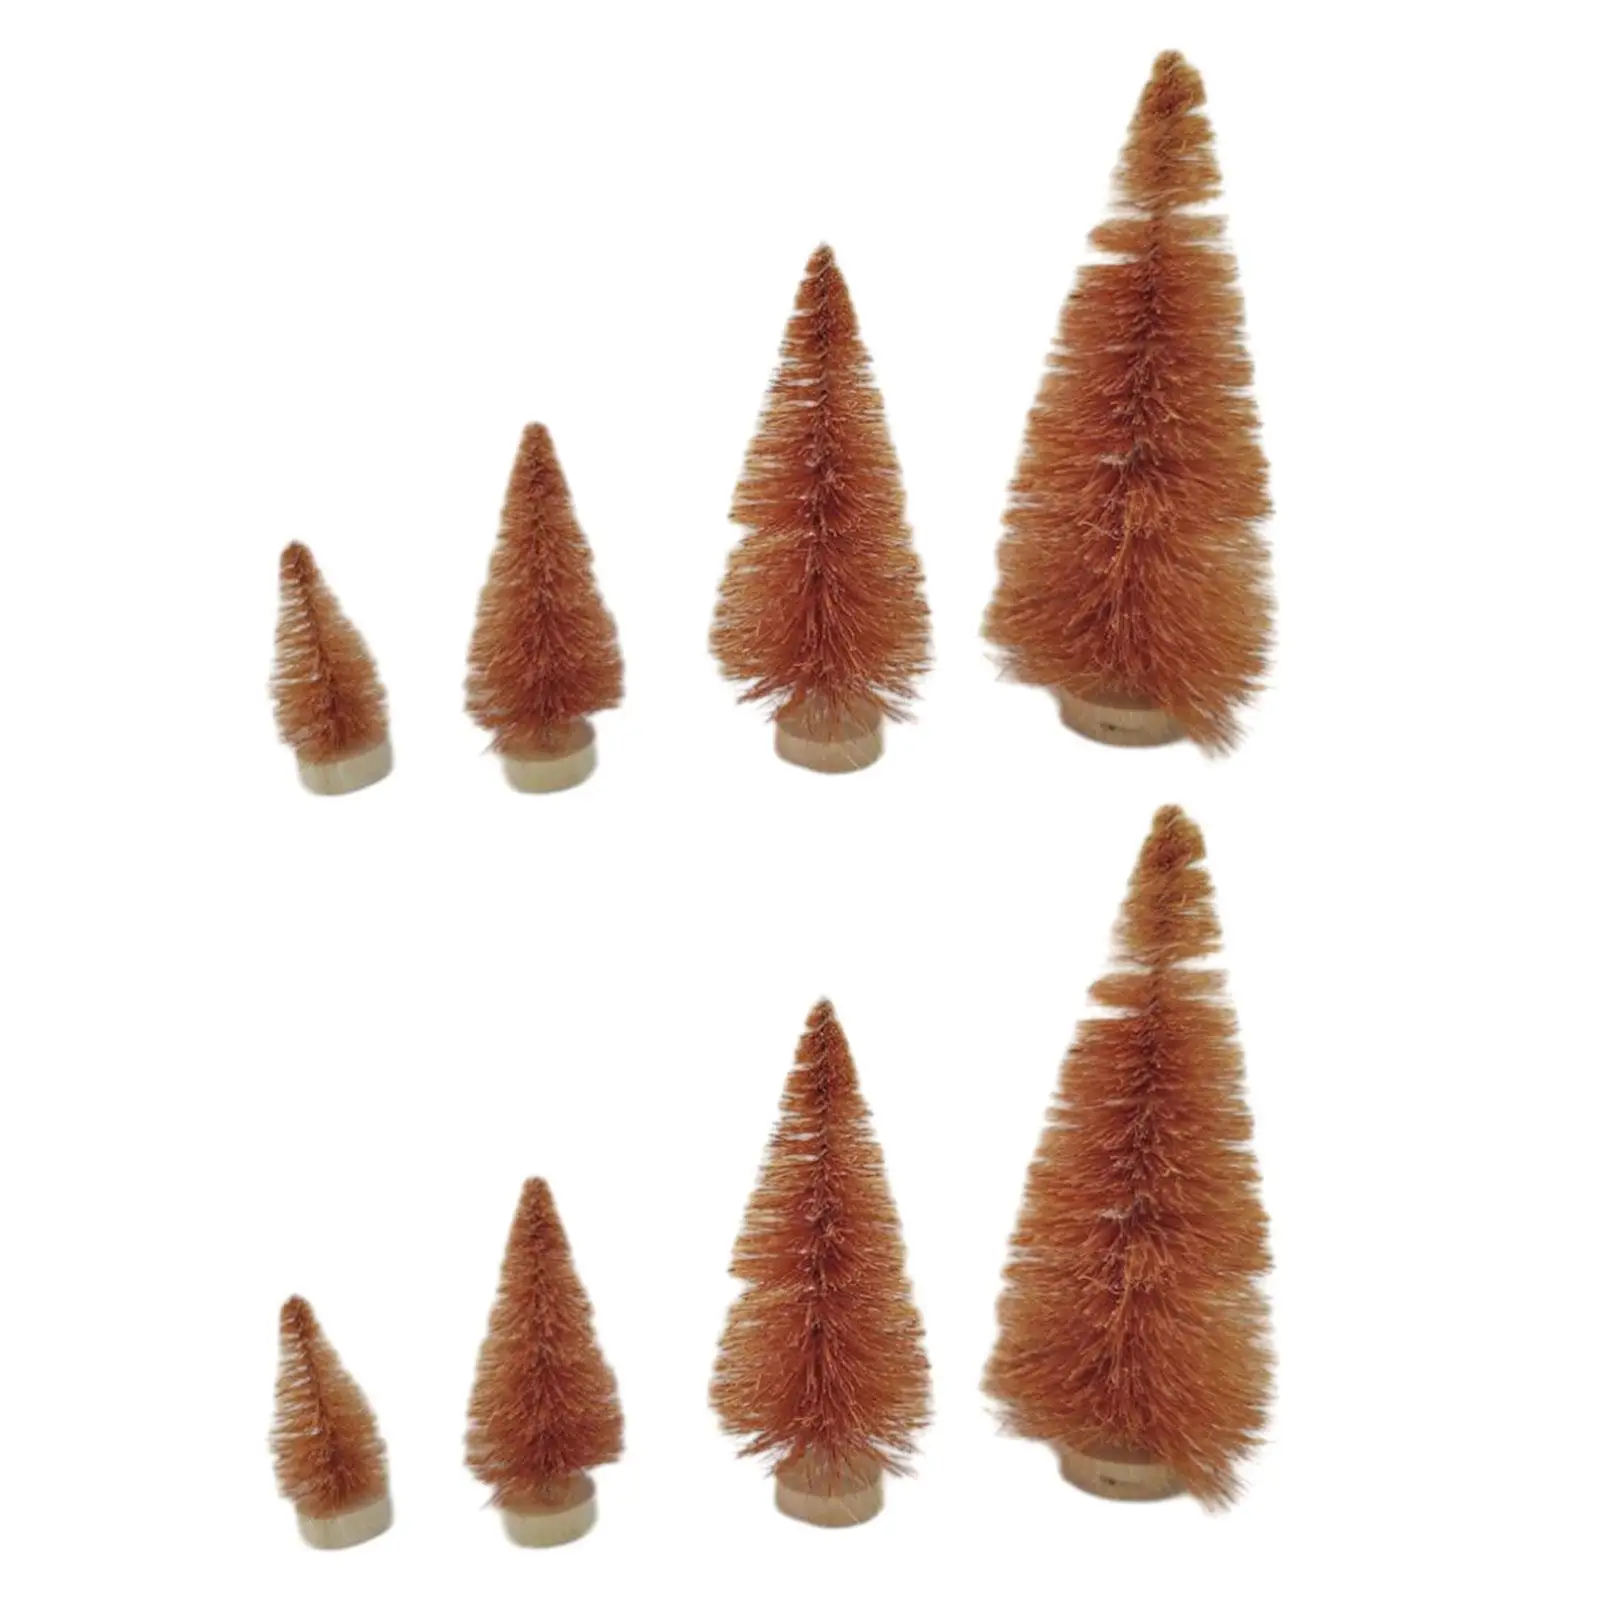 8Pcs Artificial Christmas Trees Wood Base Small Desktop Pine Trees Xmas Trees for Centerpiece Shop Display Indoor New Year